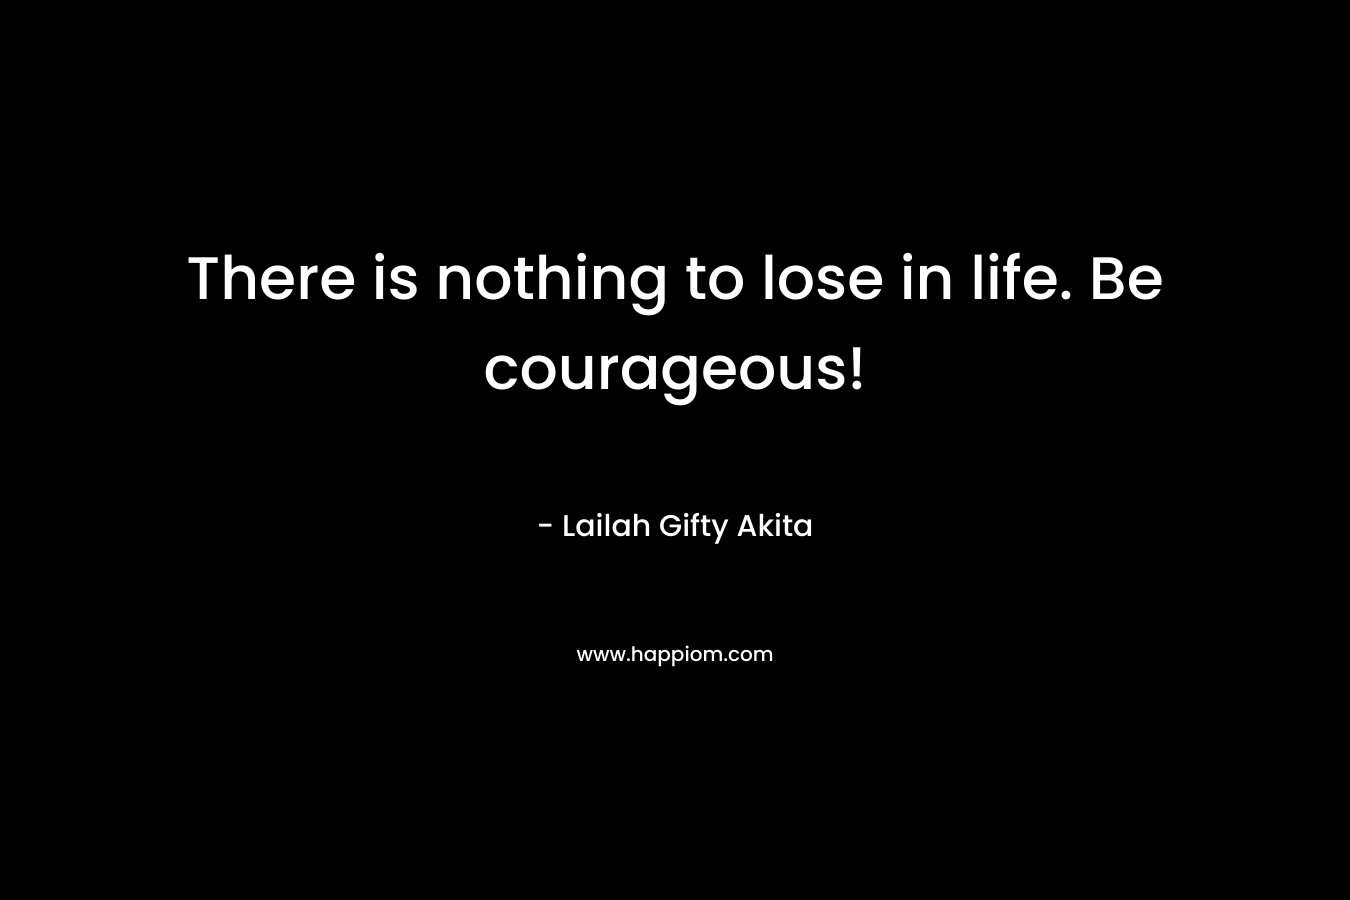 There is nothing to lose in life. Be courageous!